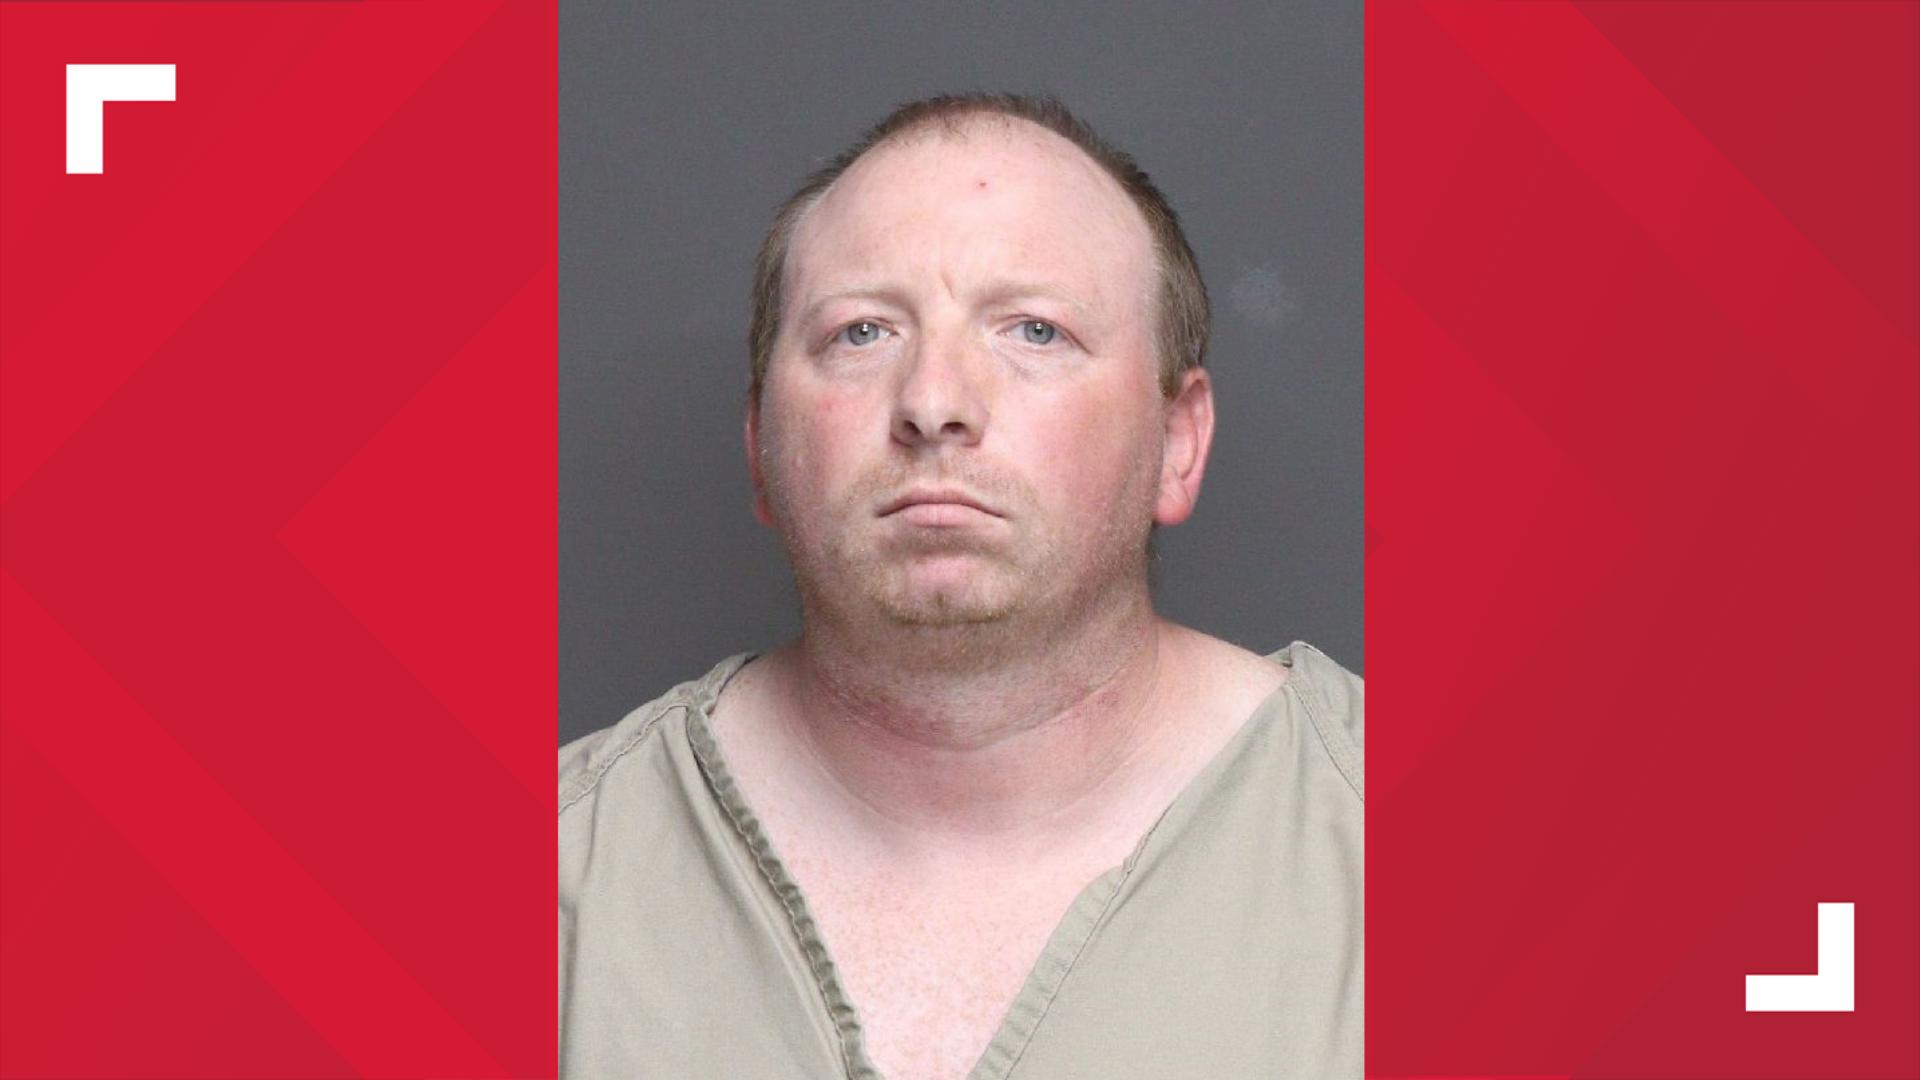 Randy Mollett, 35, is charged with child endangerment, reckless homicide and murder in connection to the boy's death.